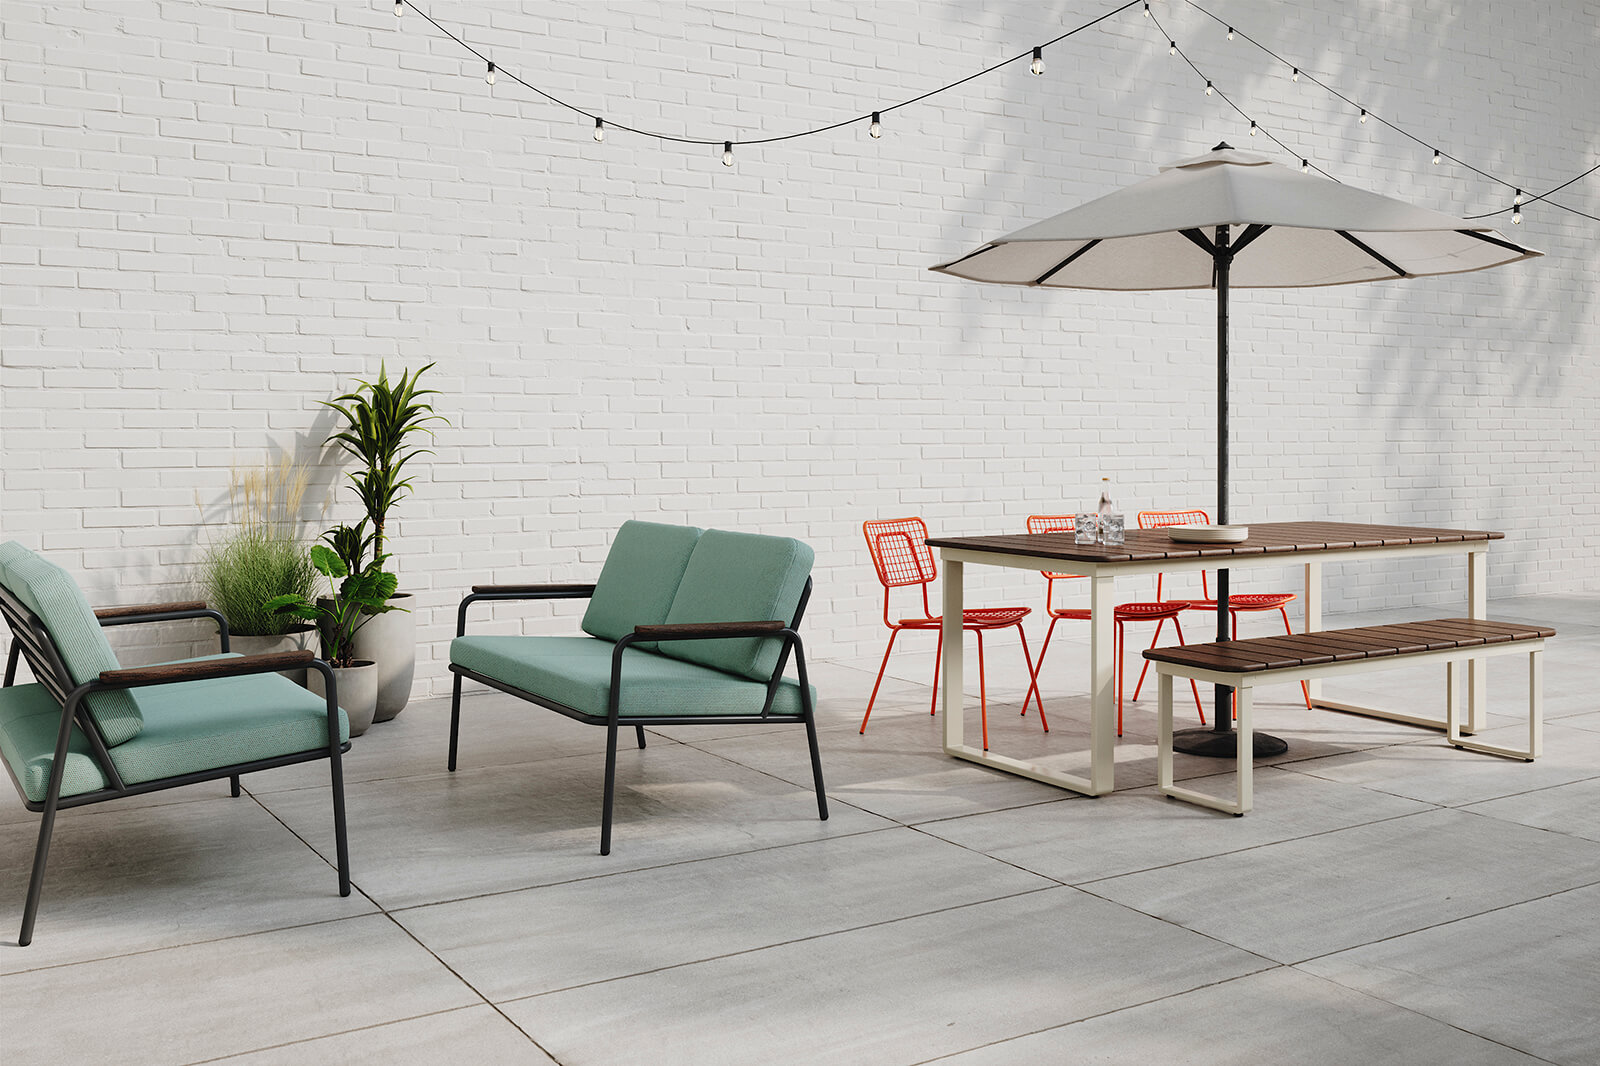 Rita Lounge Seating with the Bowen Outdoor collection and Opla chairs.